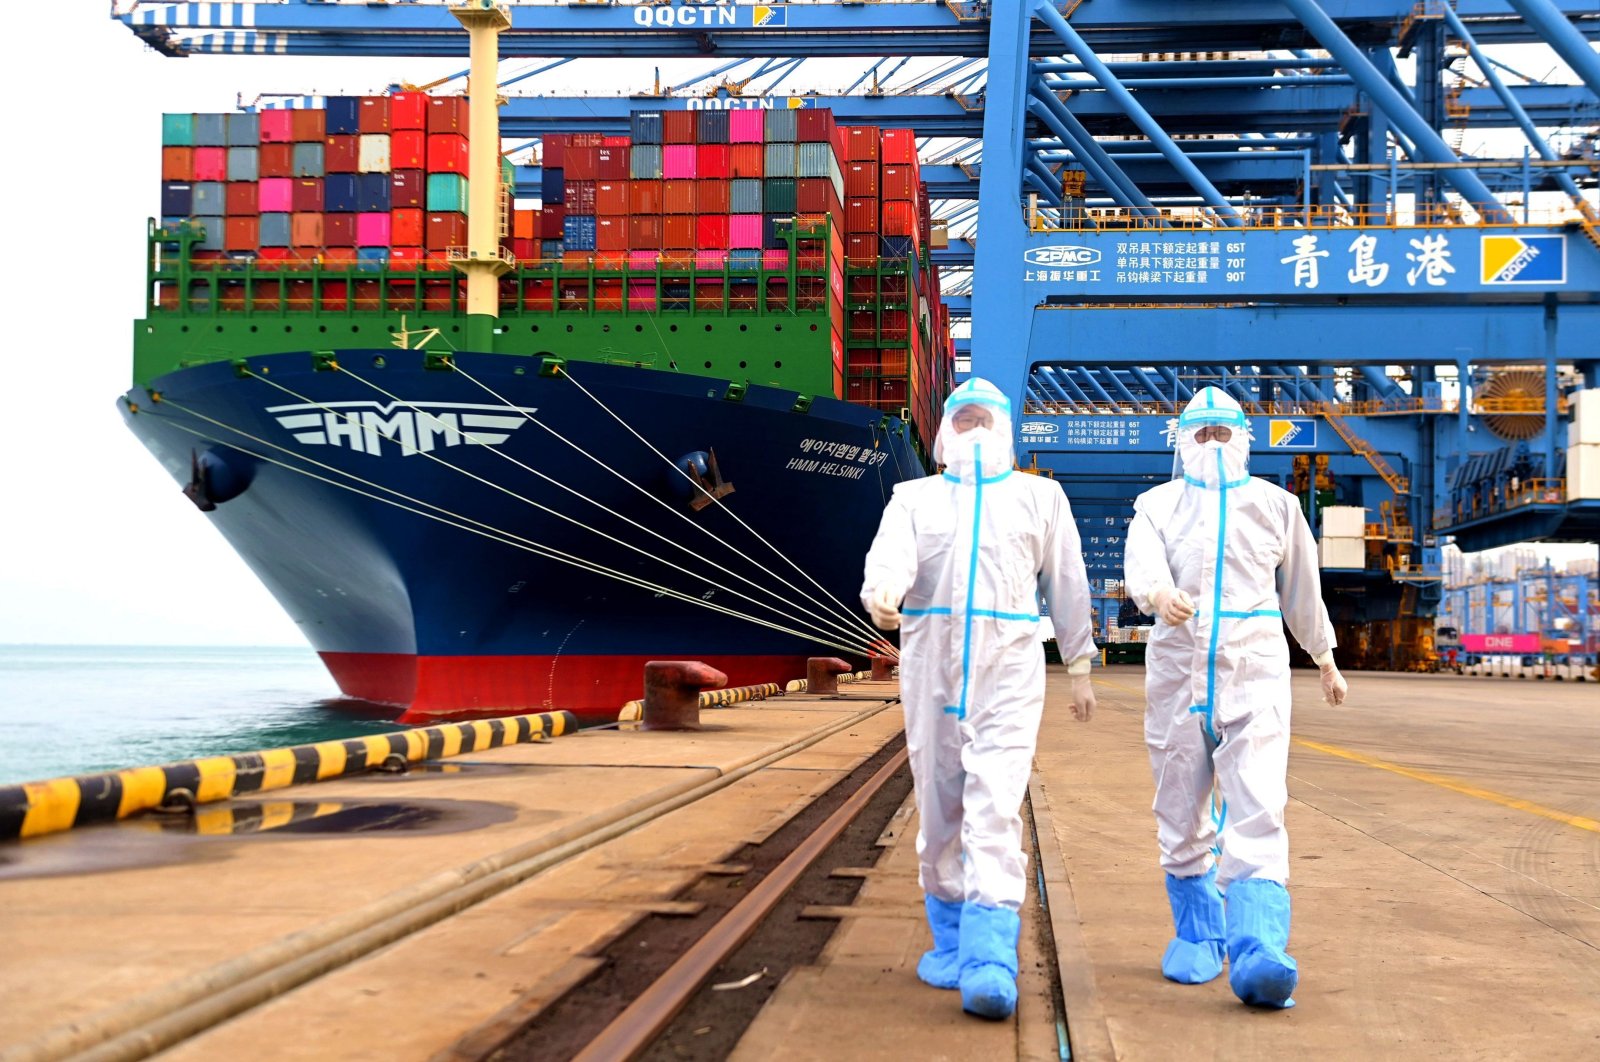 China immigration inspection officers in protective overalls near a container ship at a port in Qingdao in eastern Shandong province, China, Nov. 7, 2021. (AP Photo)